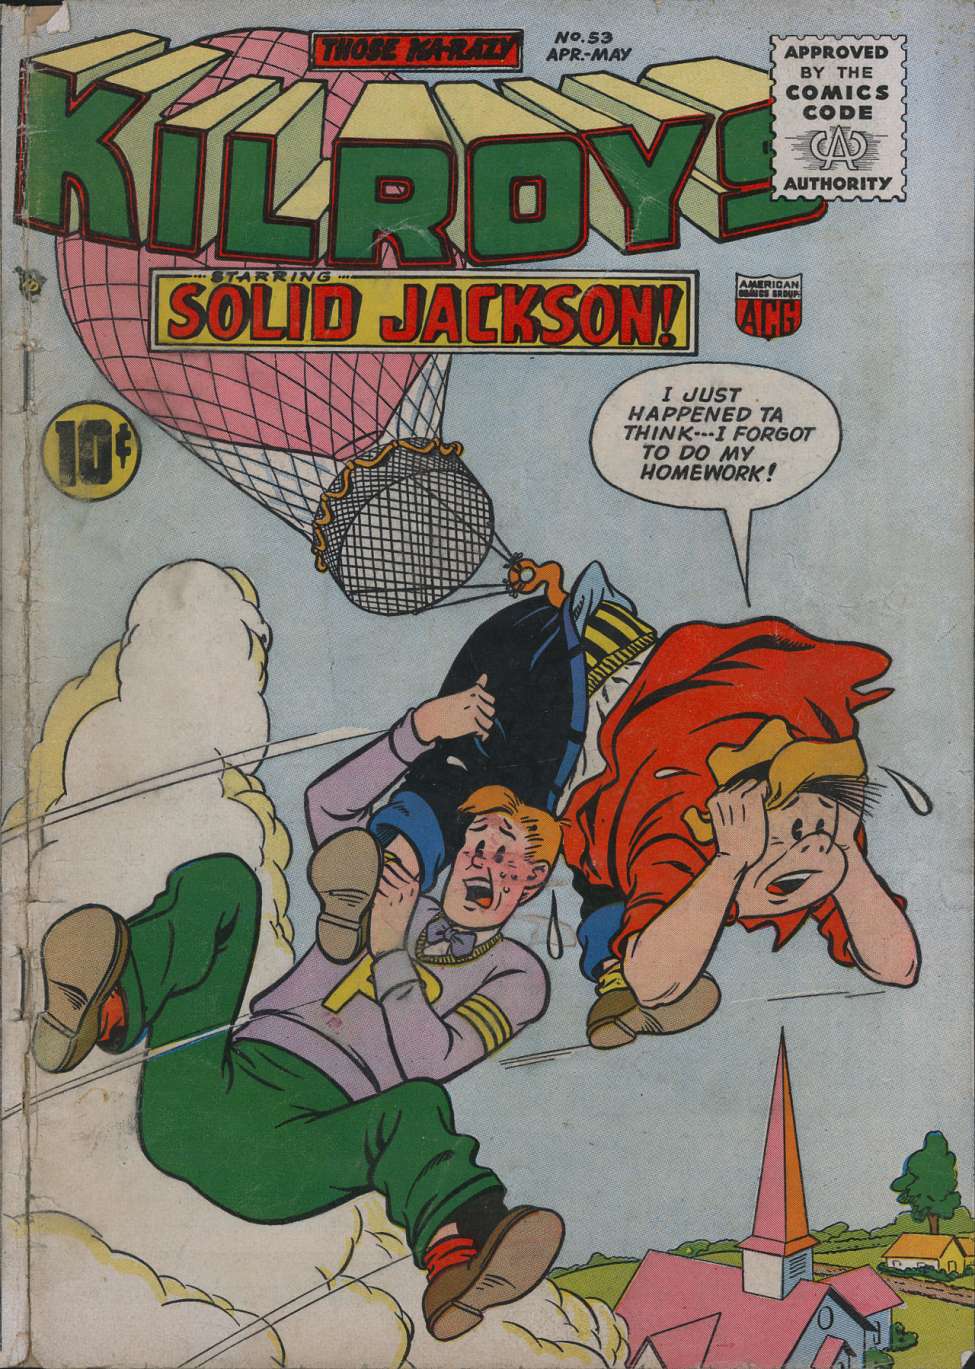 Comic Book Cover For The Kilroys 53